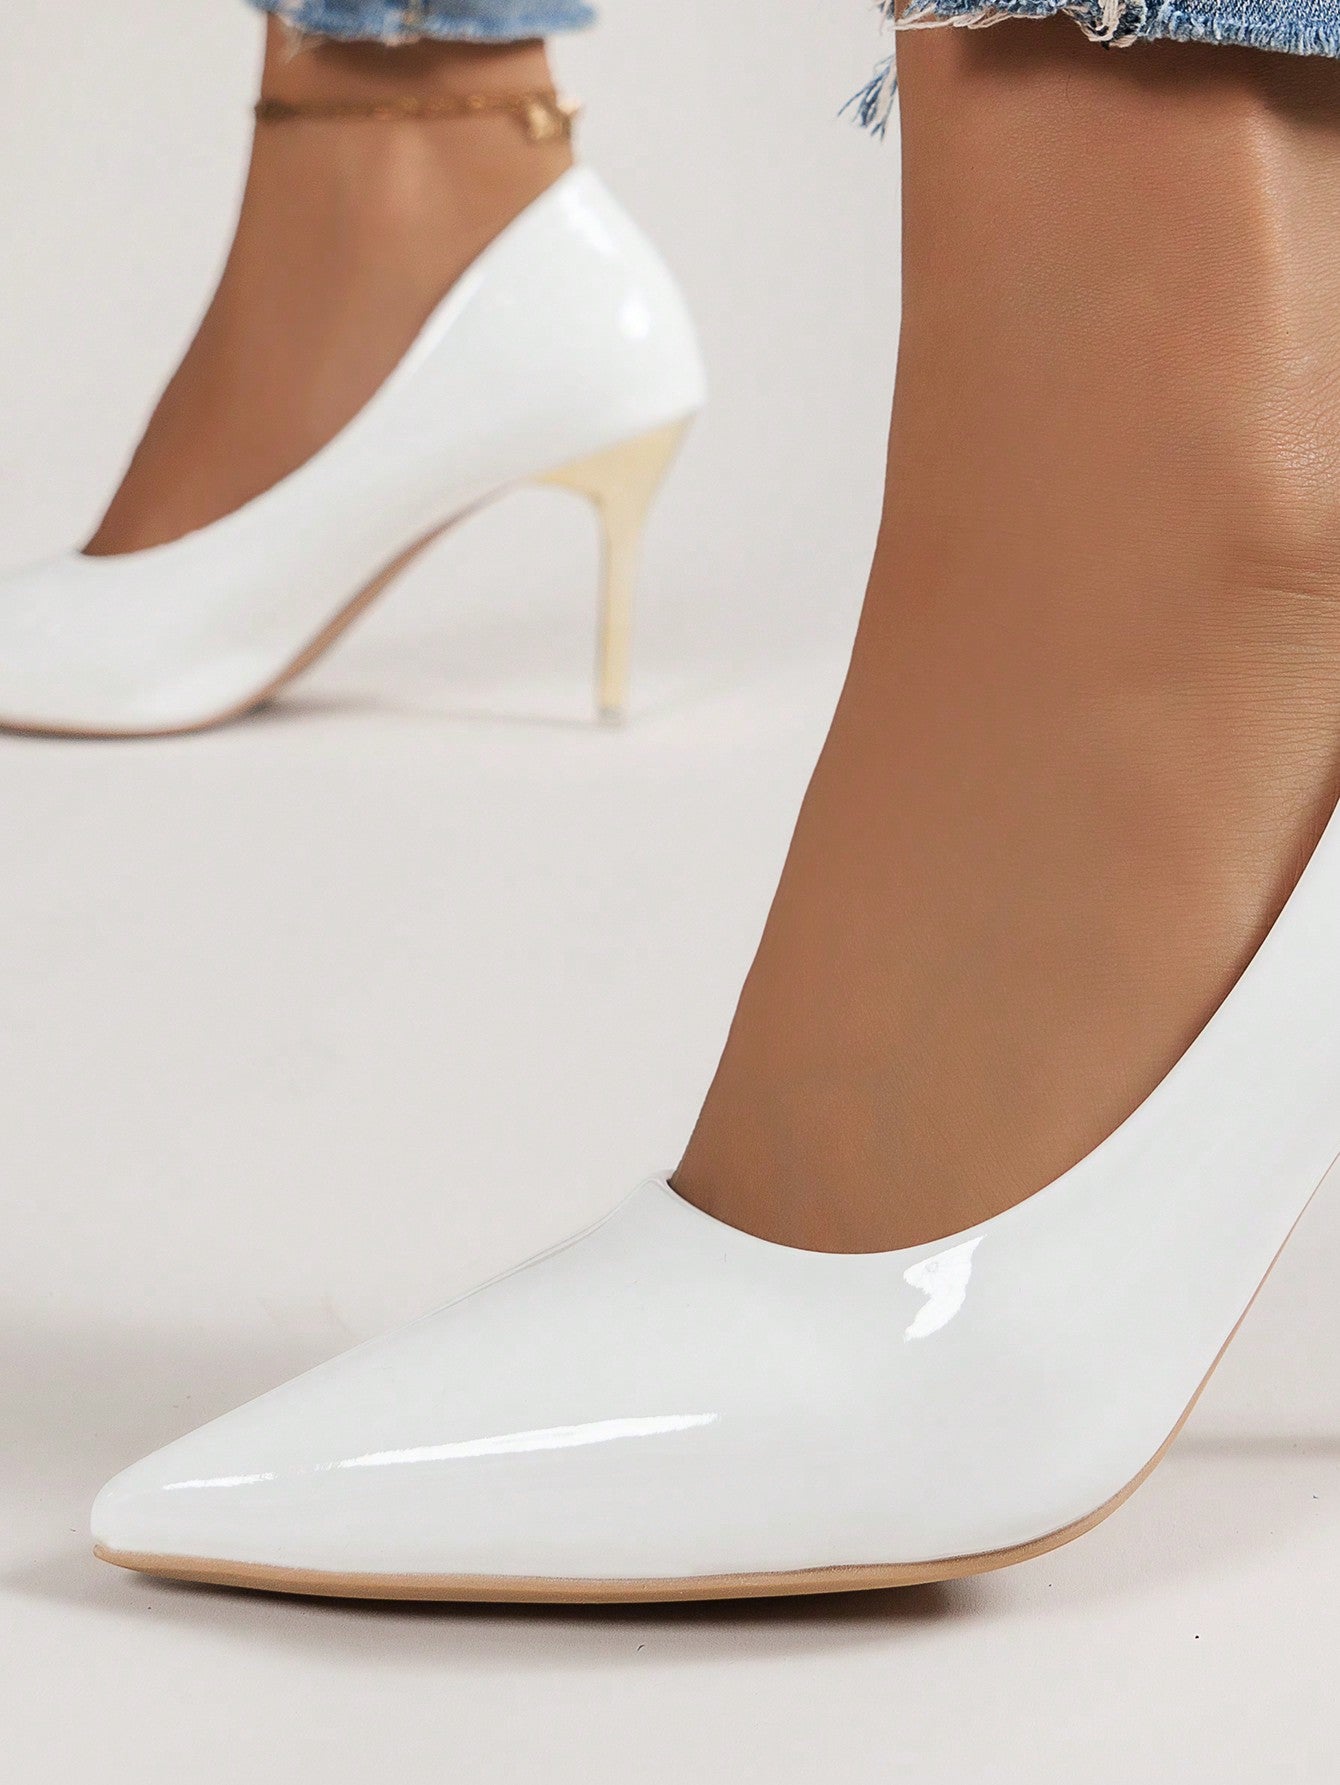 White Pointed Shiny Patent Leather Electroplating High-Heeled Shoes For Women's Formal Outfit, Elegant White High-Heels